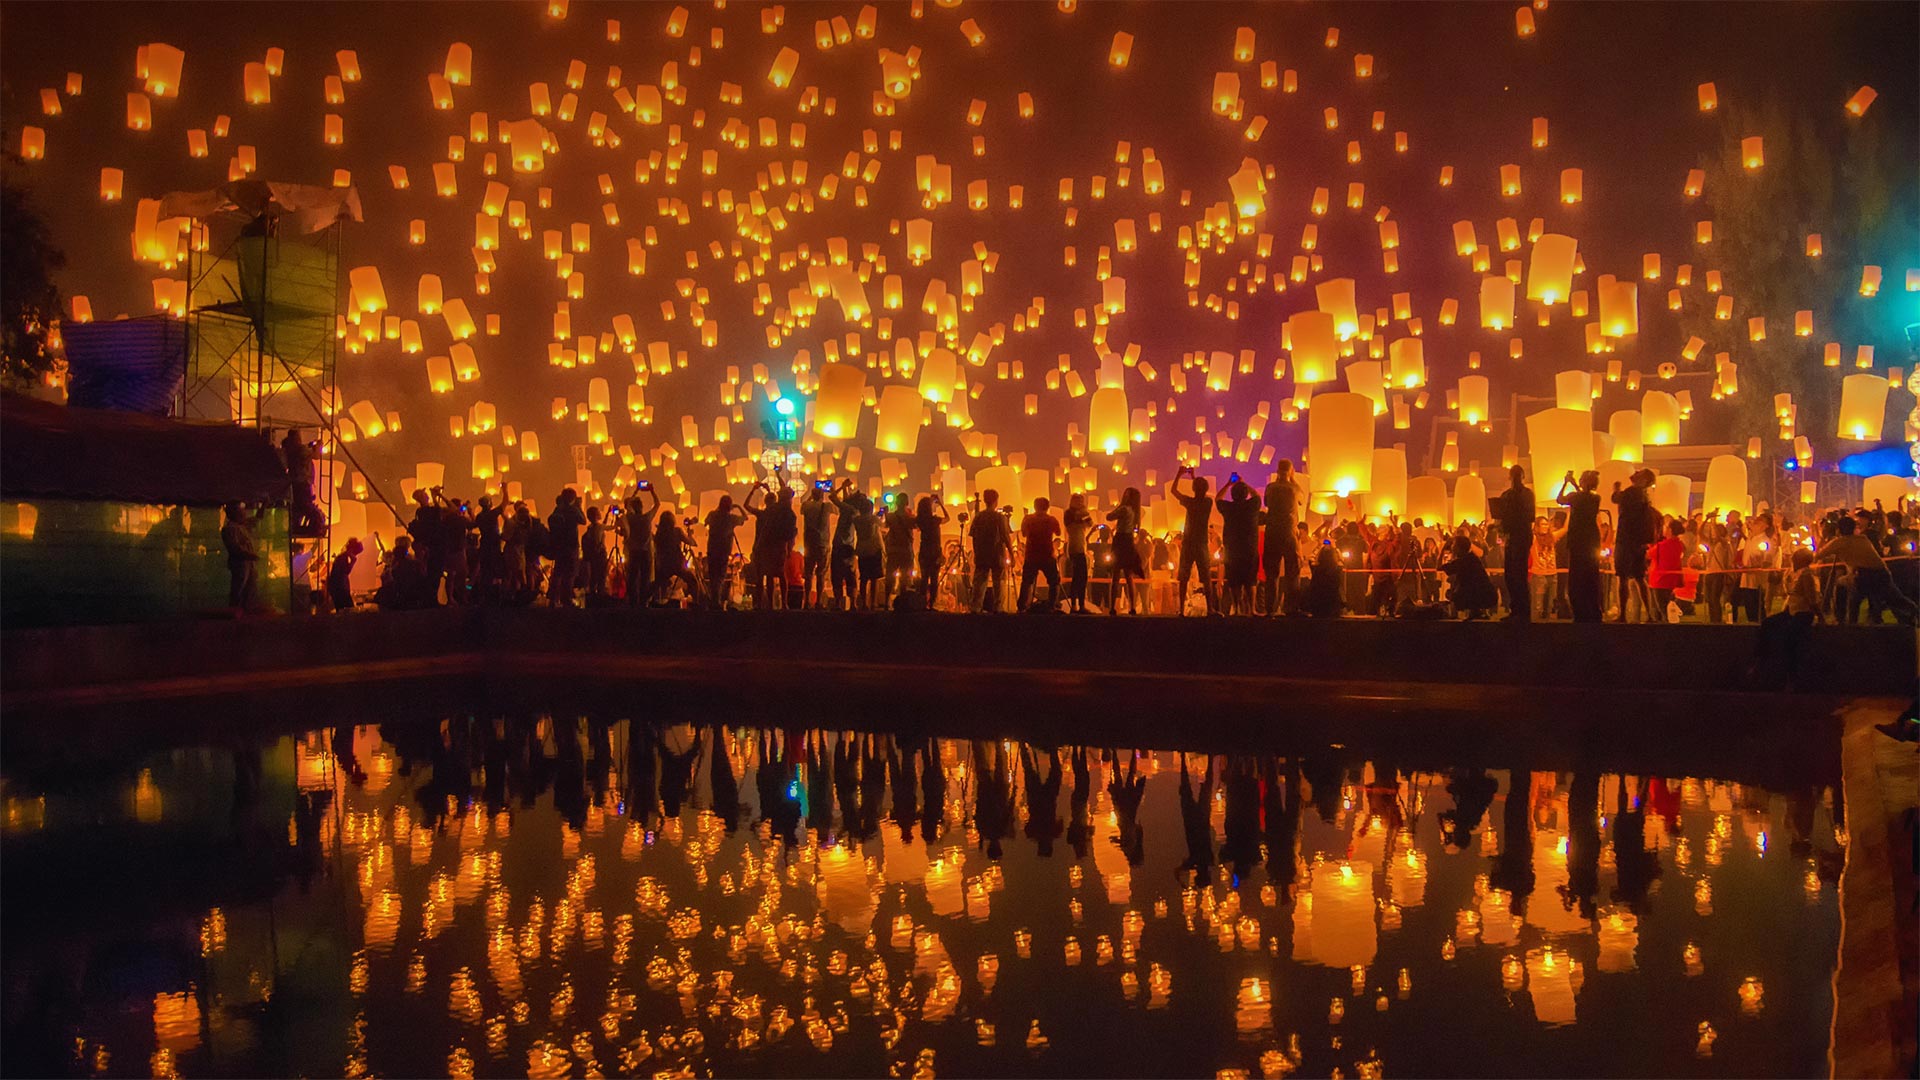 Sky lanterns take flight during the Yi Peng Festival in Chiang Mai, Thailand - Suttipong Sutiratanachai/Getty Images)